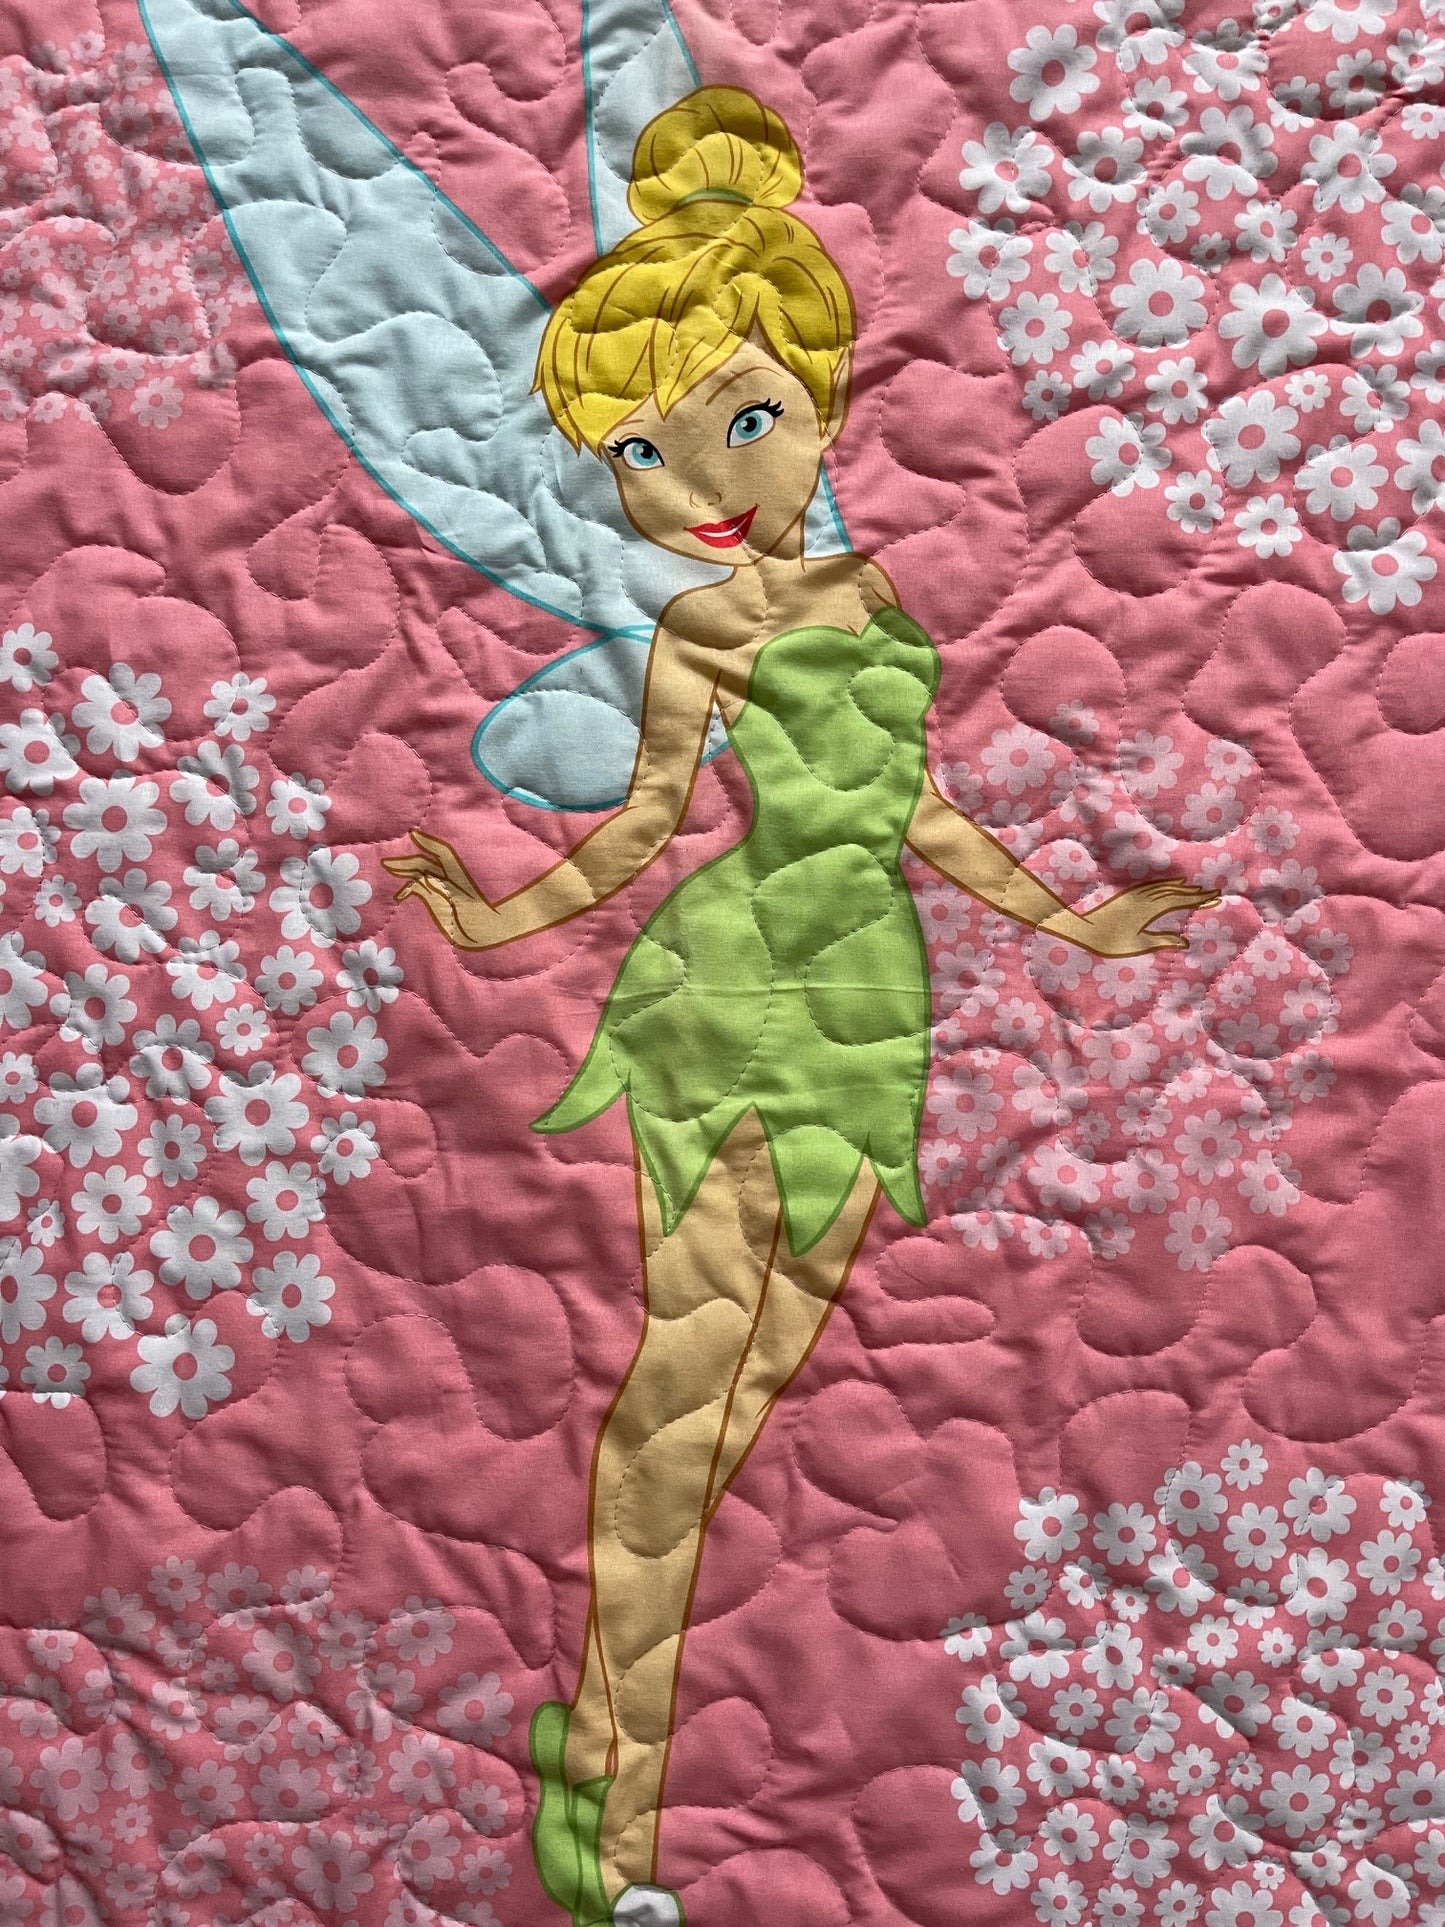 DISNEY PETER PAN'S TINKER BELL Inspired 36"x44" Quilted Blanket